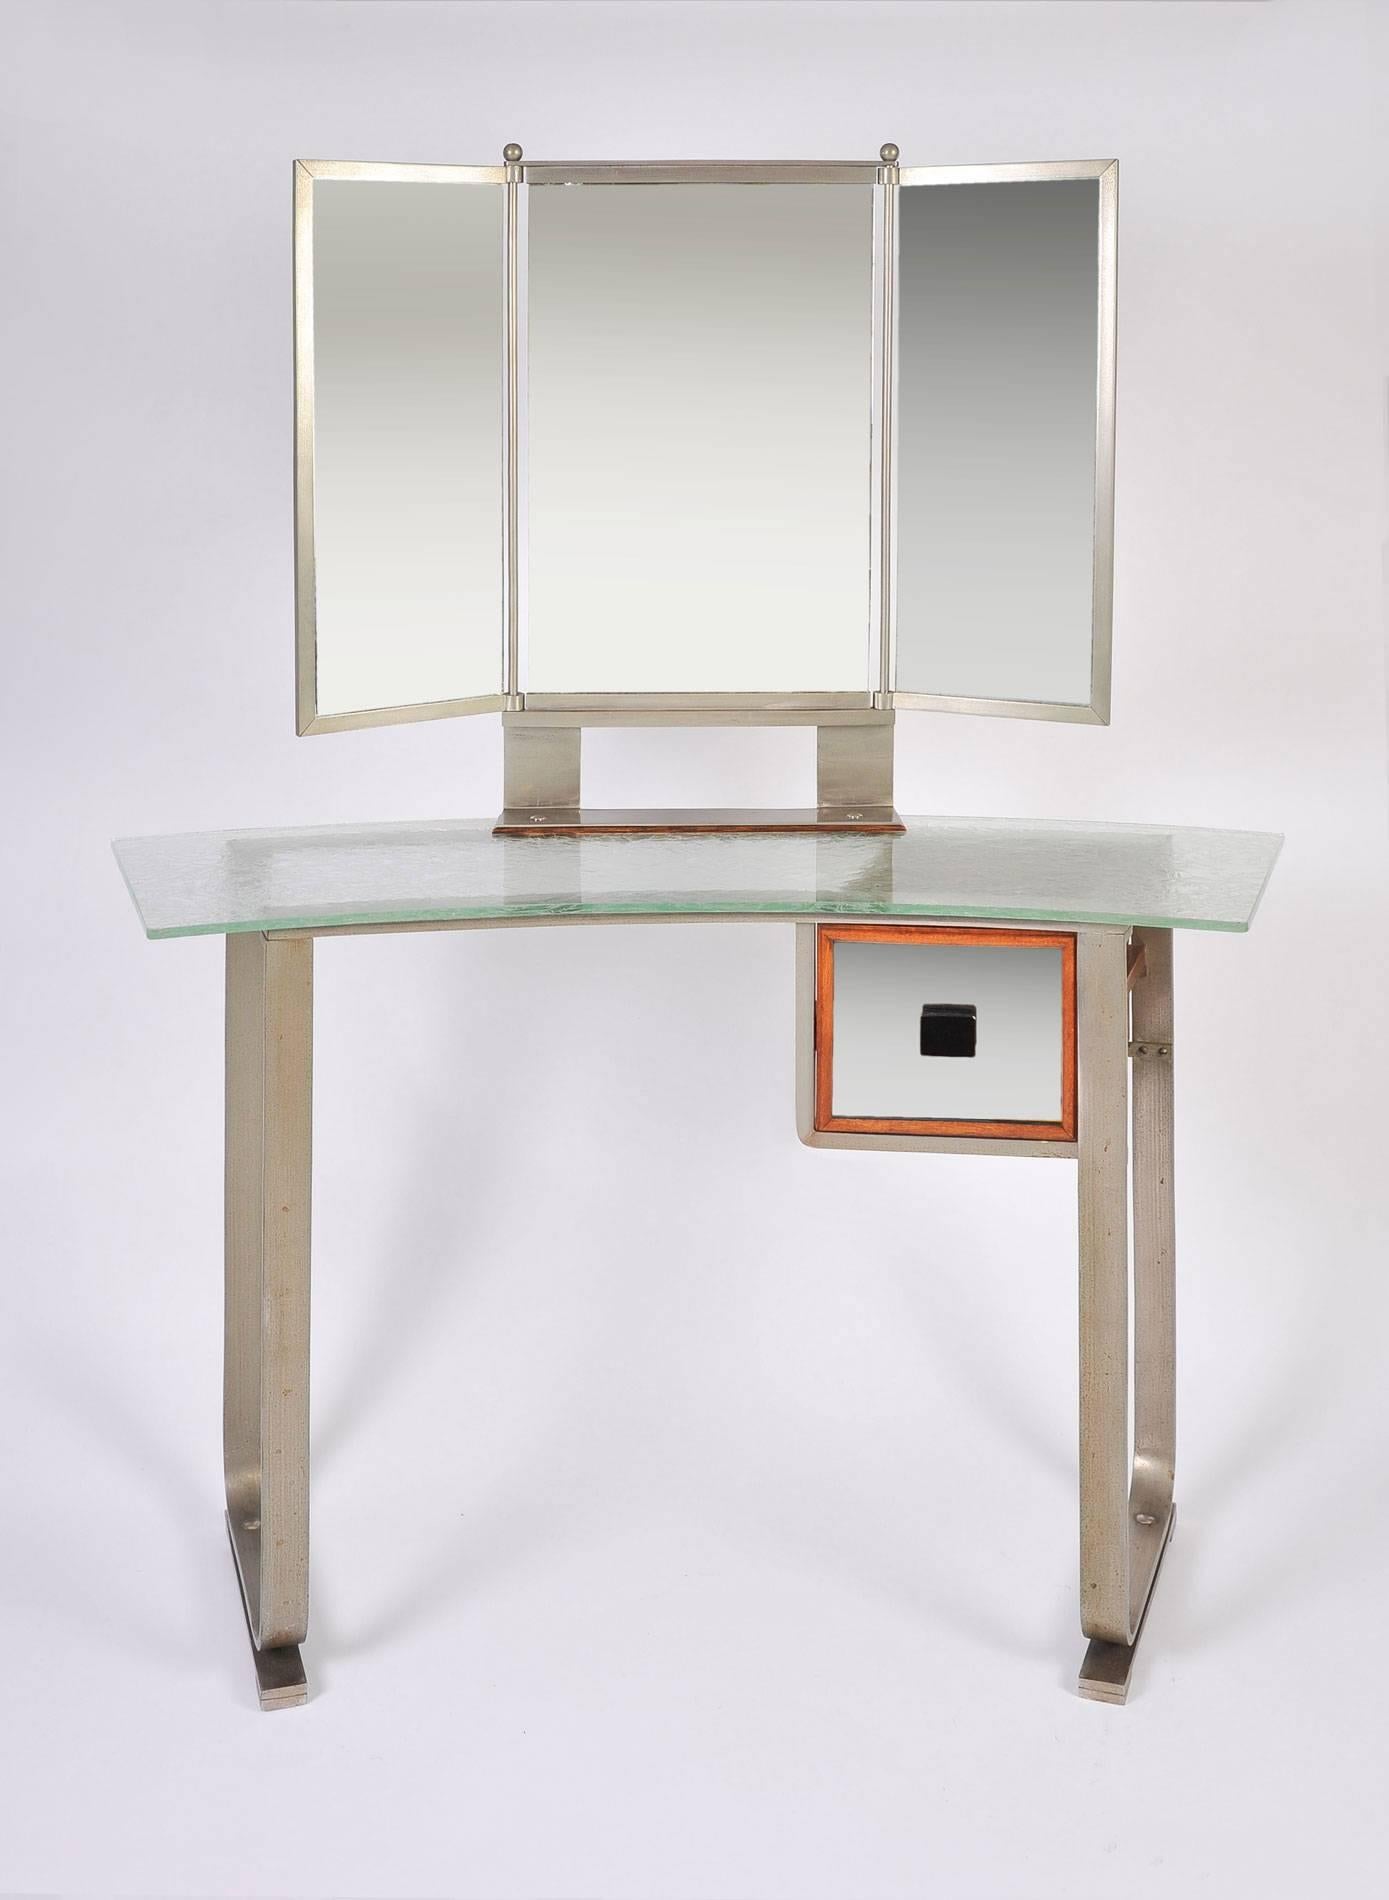 Rare chrome and pale green textured glass dressing table. The triptych mirror stands on wide chrome supports and is surrounded in chrome. Single glass drawer has wooden trim.